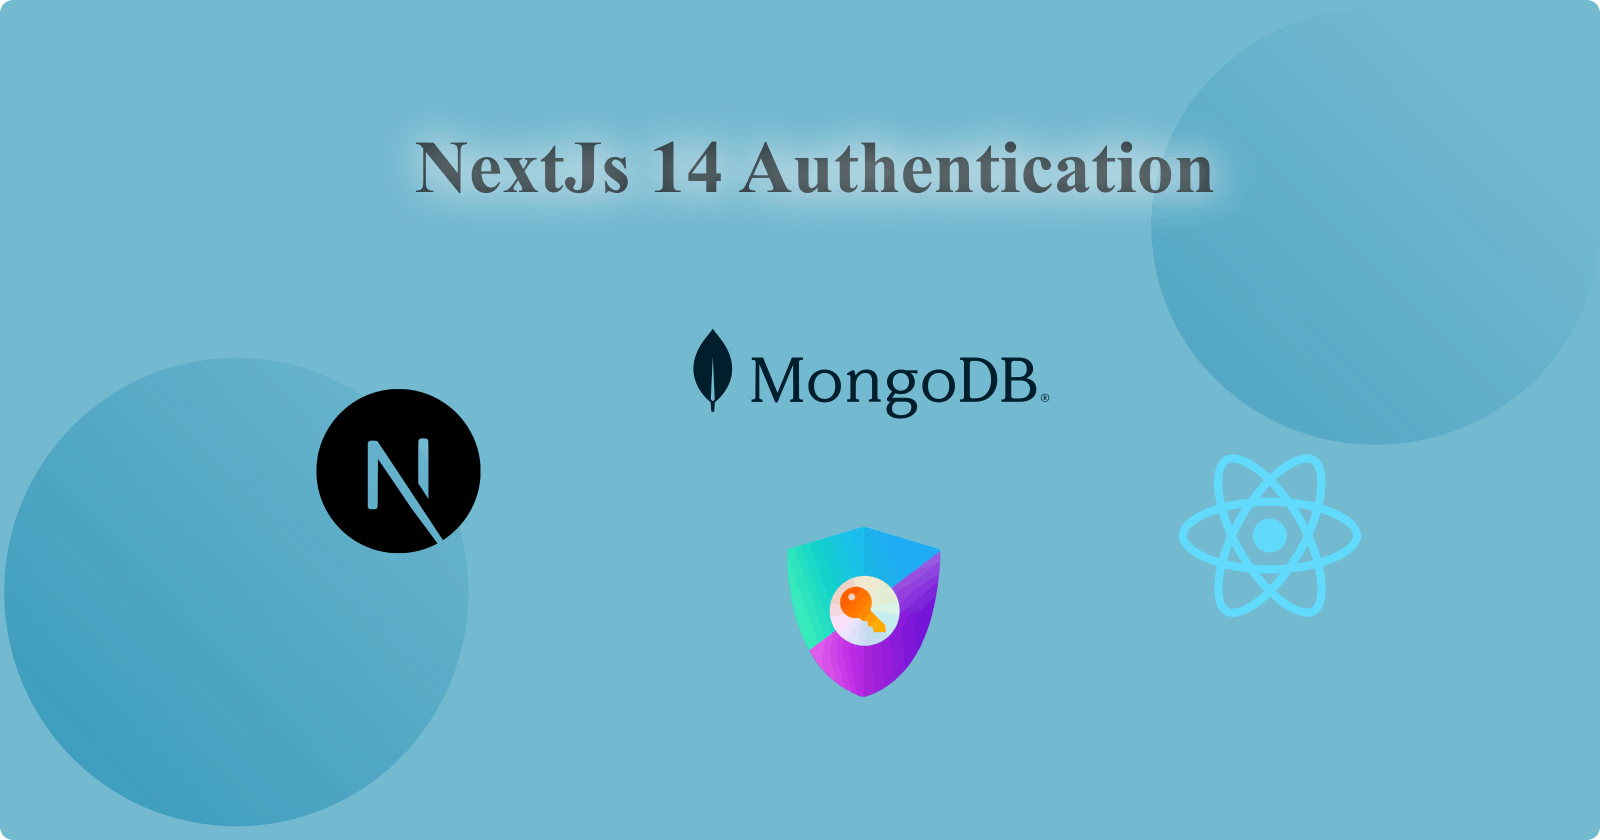 Nextjs 14 app router authentication & role-based authorization using nextauth & mongodb adapter